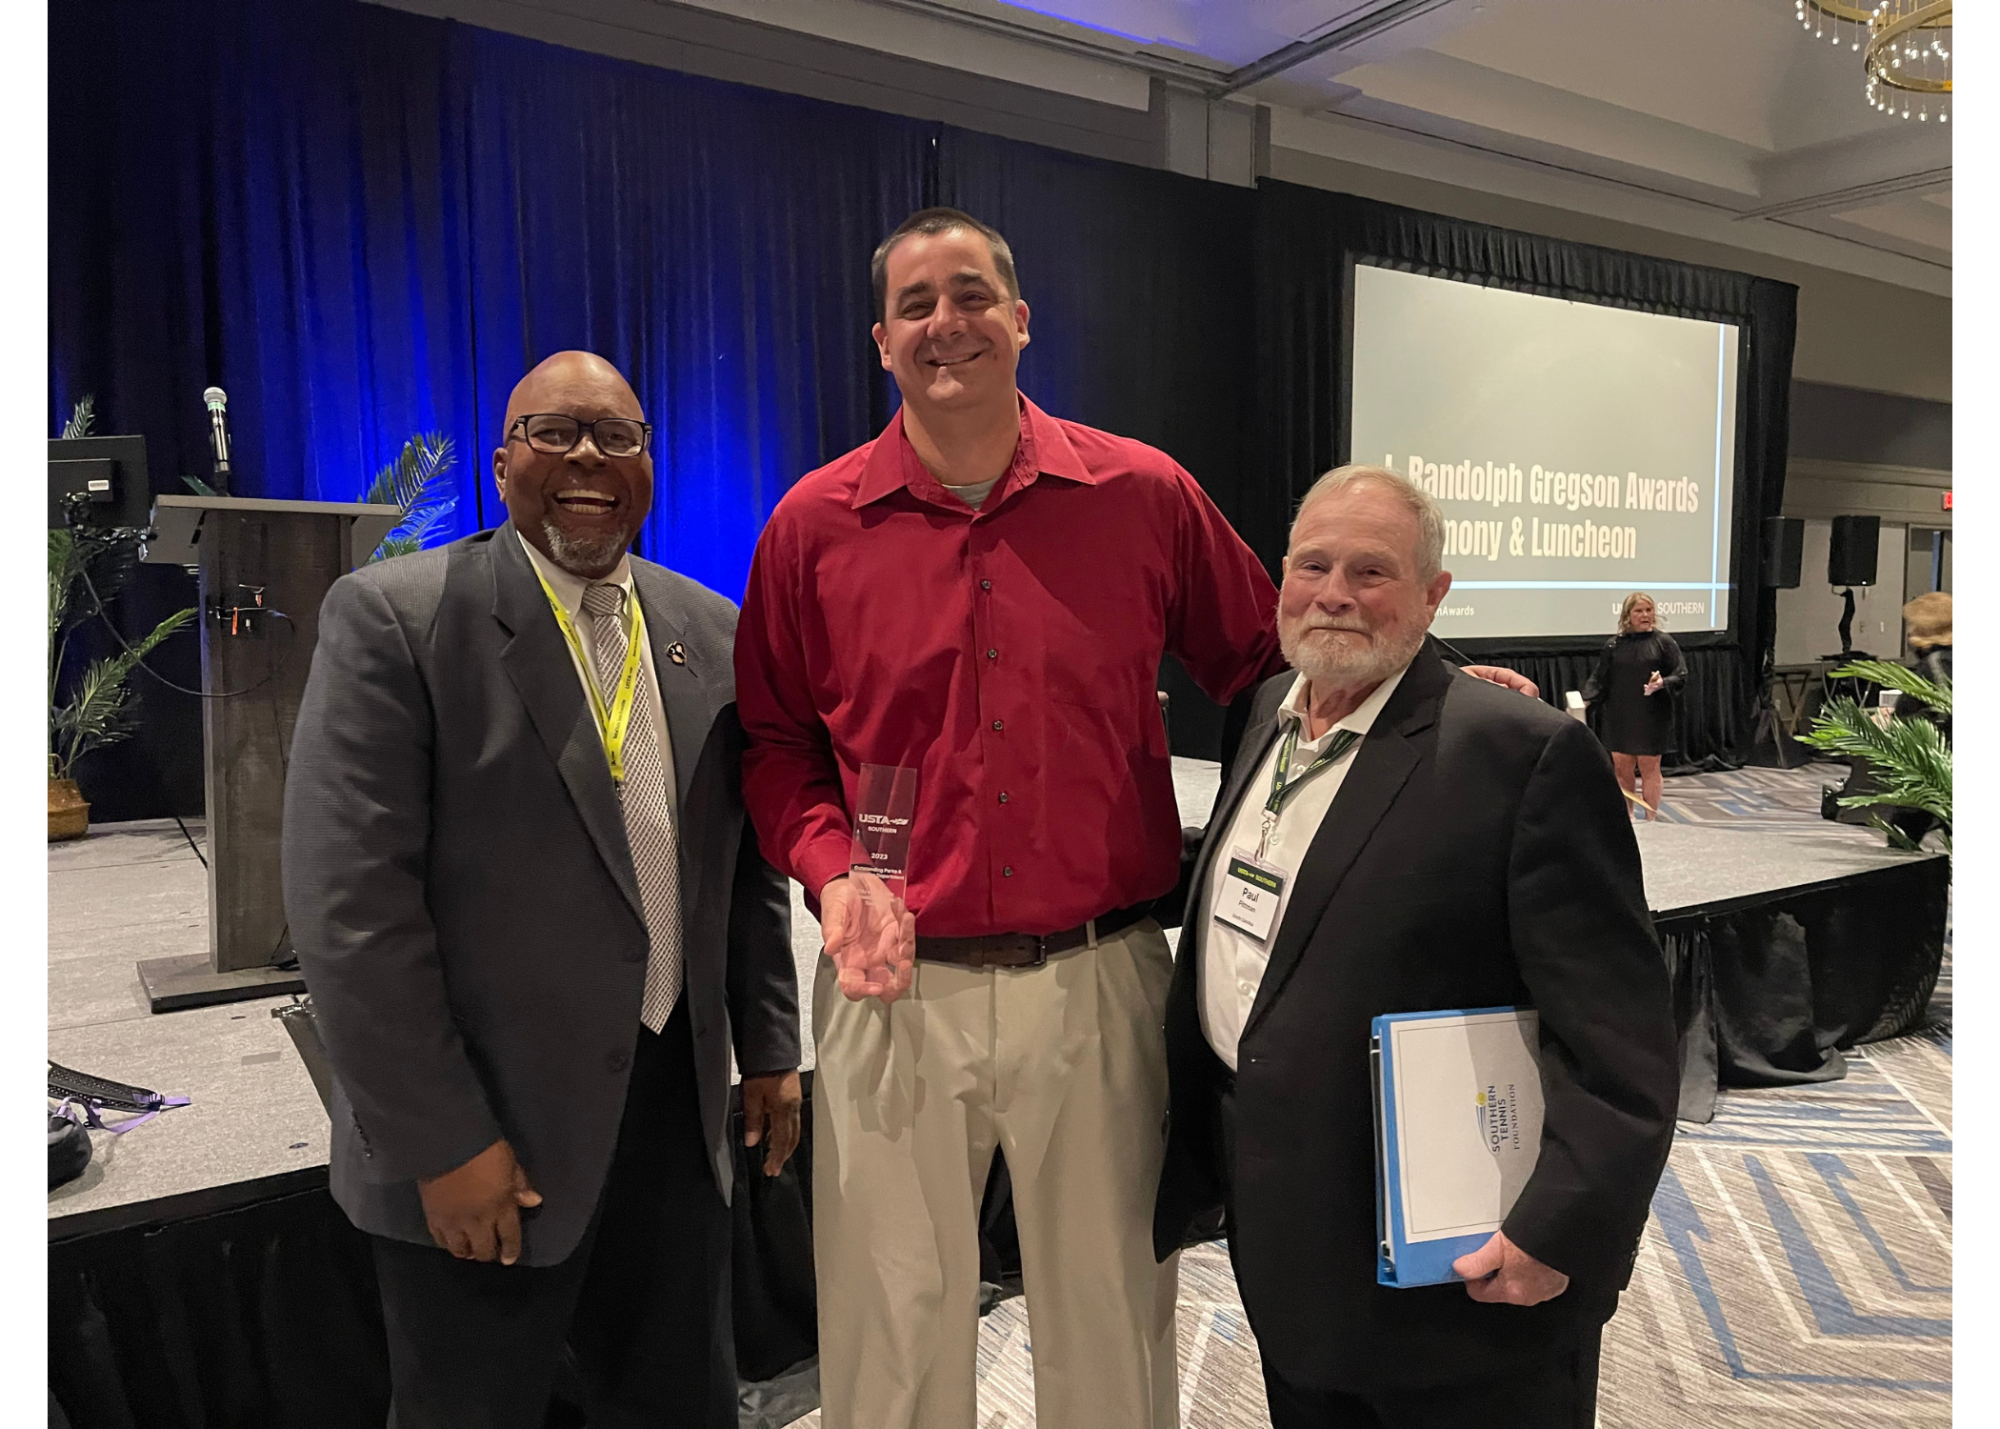 Pictured, from left, are Ernie James, Tim Wilson and Paul Pittman after the City of Florence was honored with the 2023 Outstanding Parks and Recreations Department Award at the USTA Southern Annual Meeting in Atlanta.